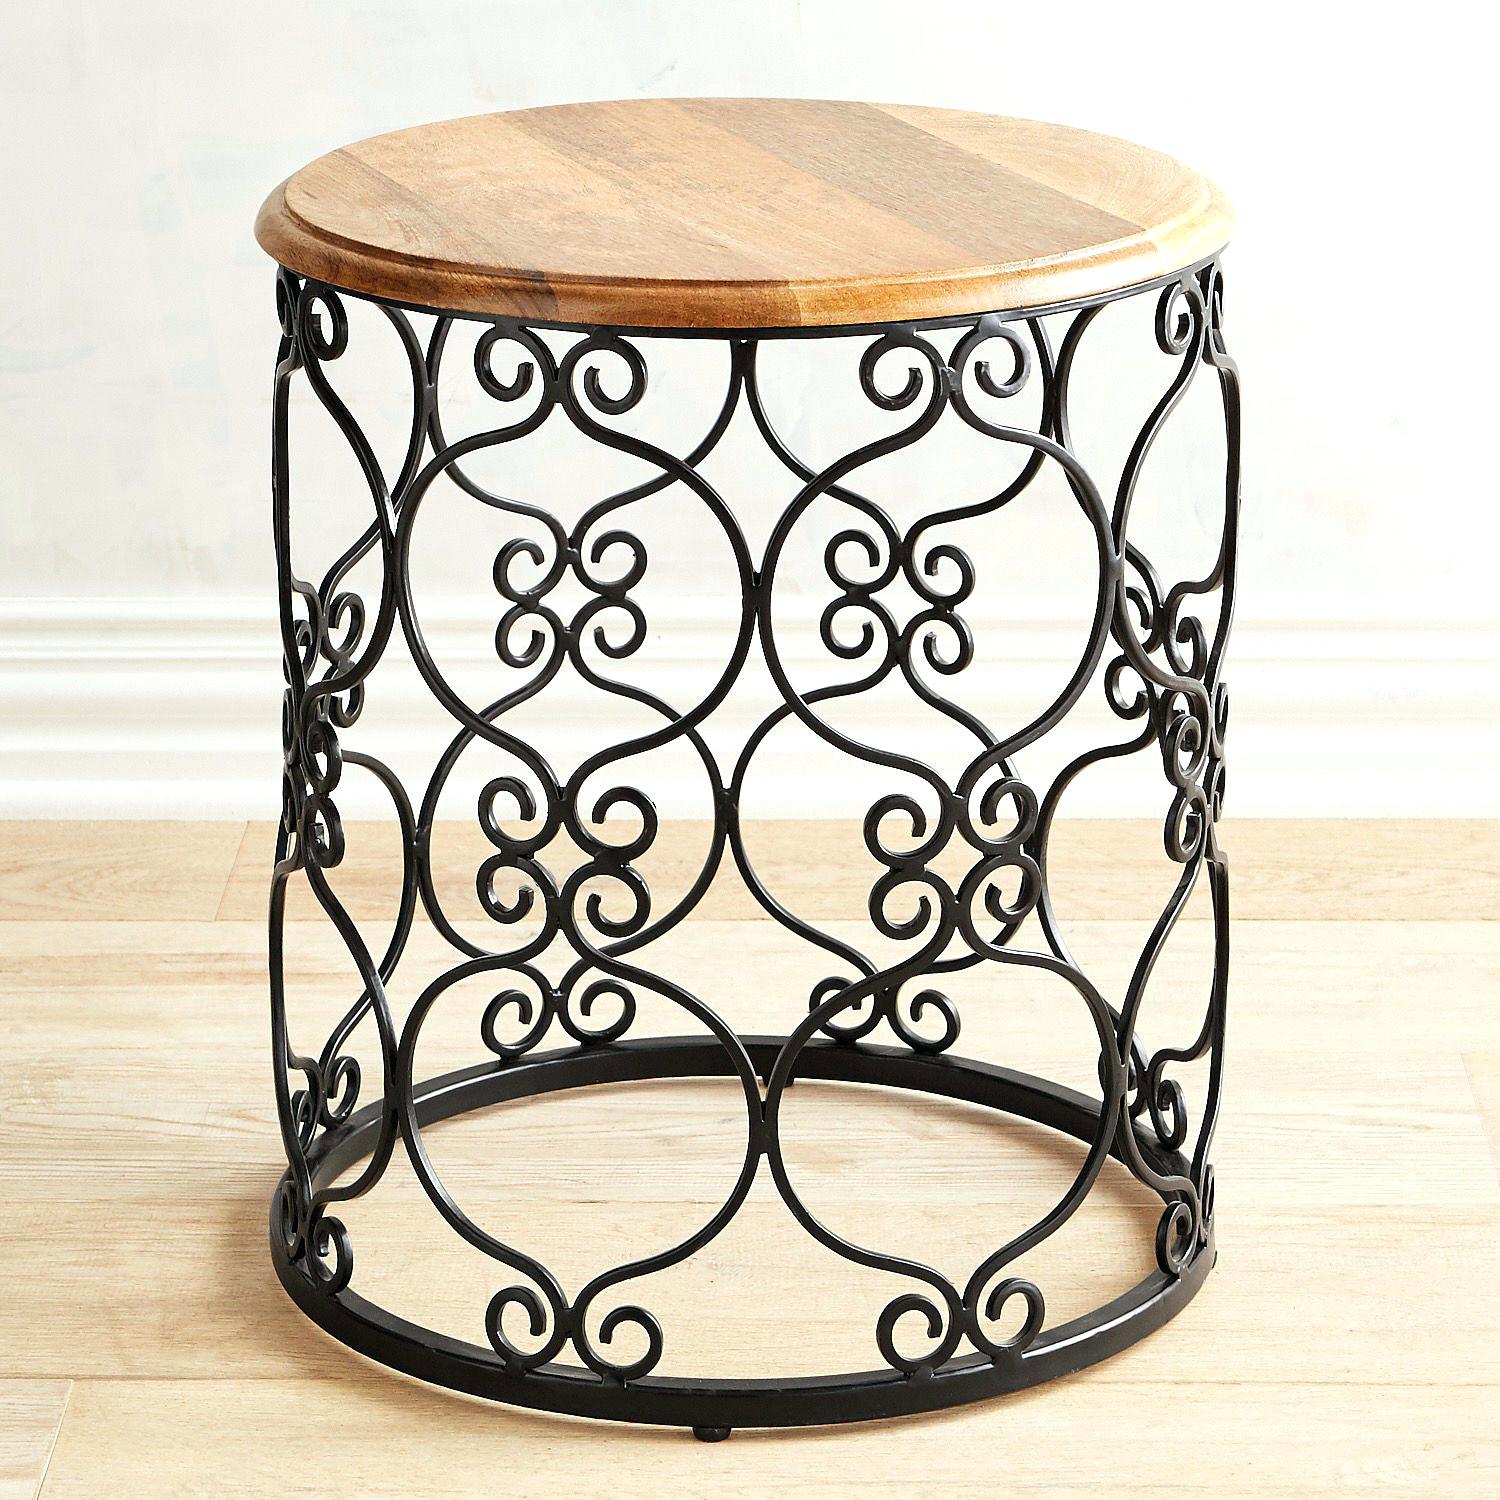 fretwork accent table grey topaz coffee tables target magnificent small round best ideas threshold yellow metal strip between carpet and wood dining bench set silverware lucite